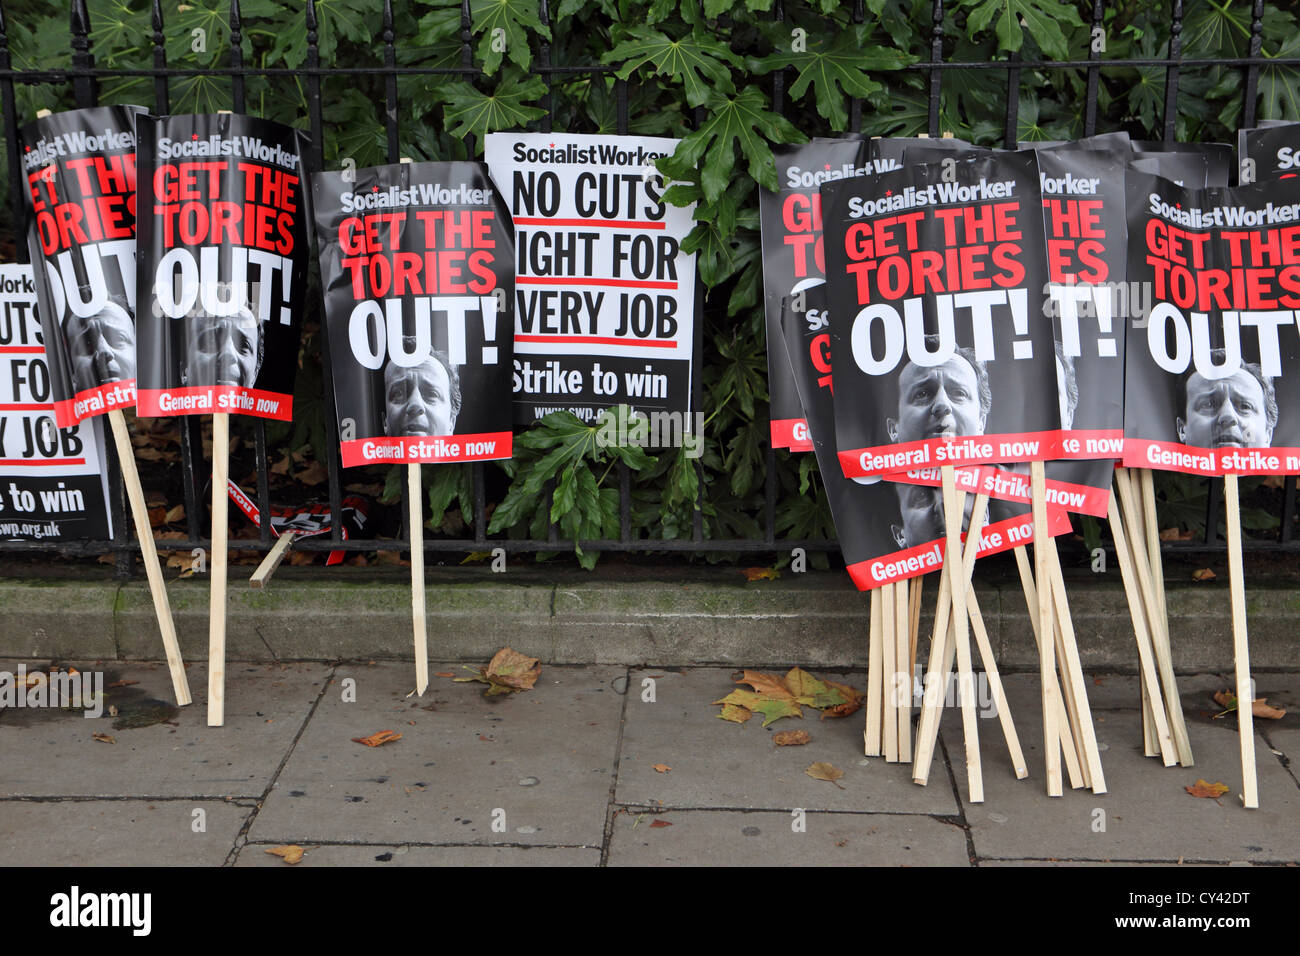 Protest placards at A Future That Works, central London, UK Stock Photo